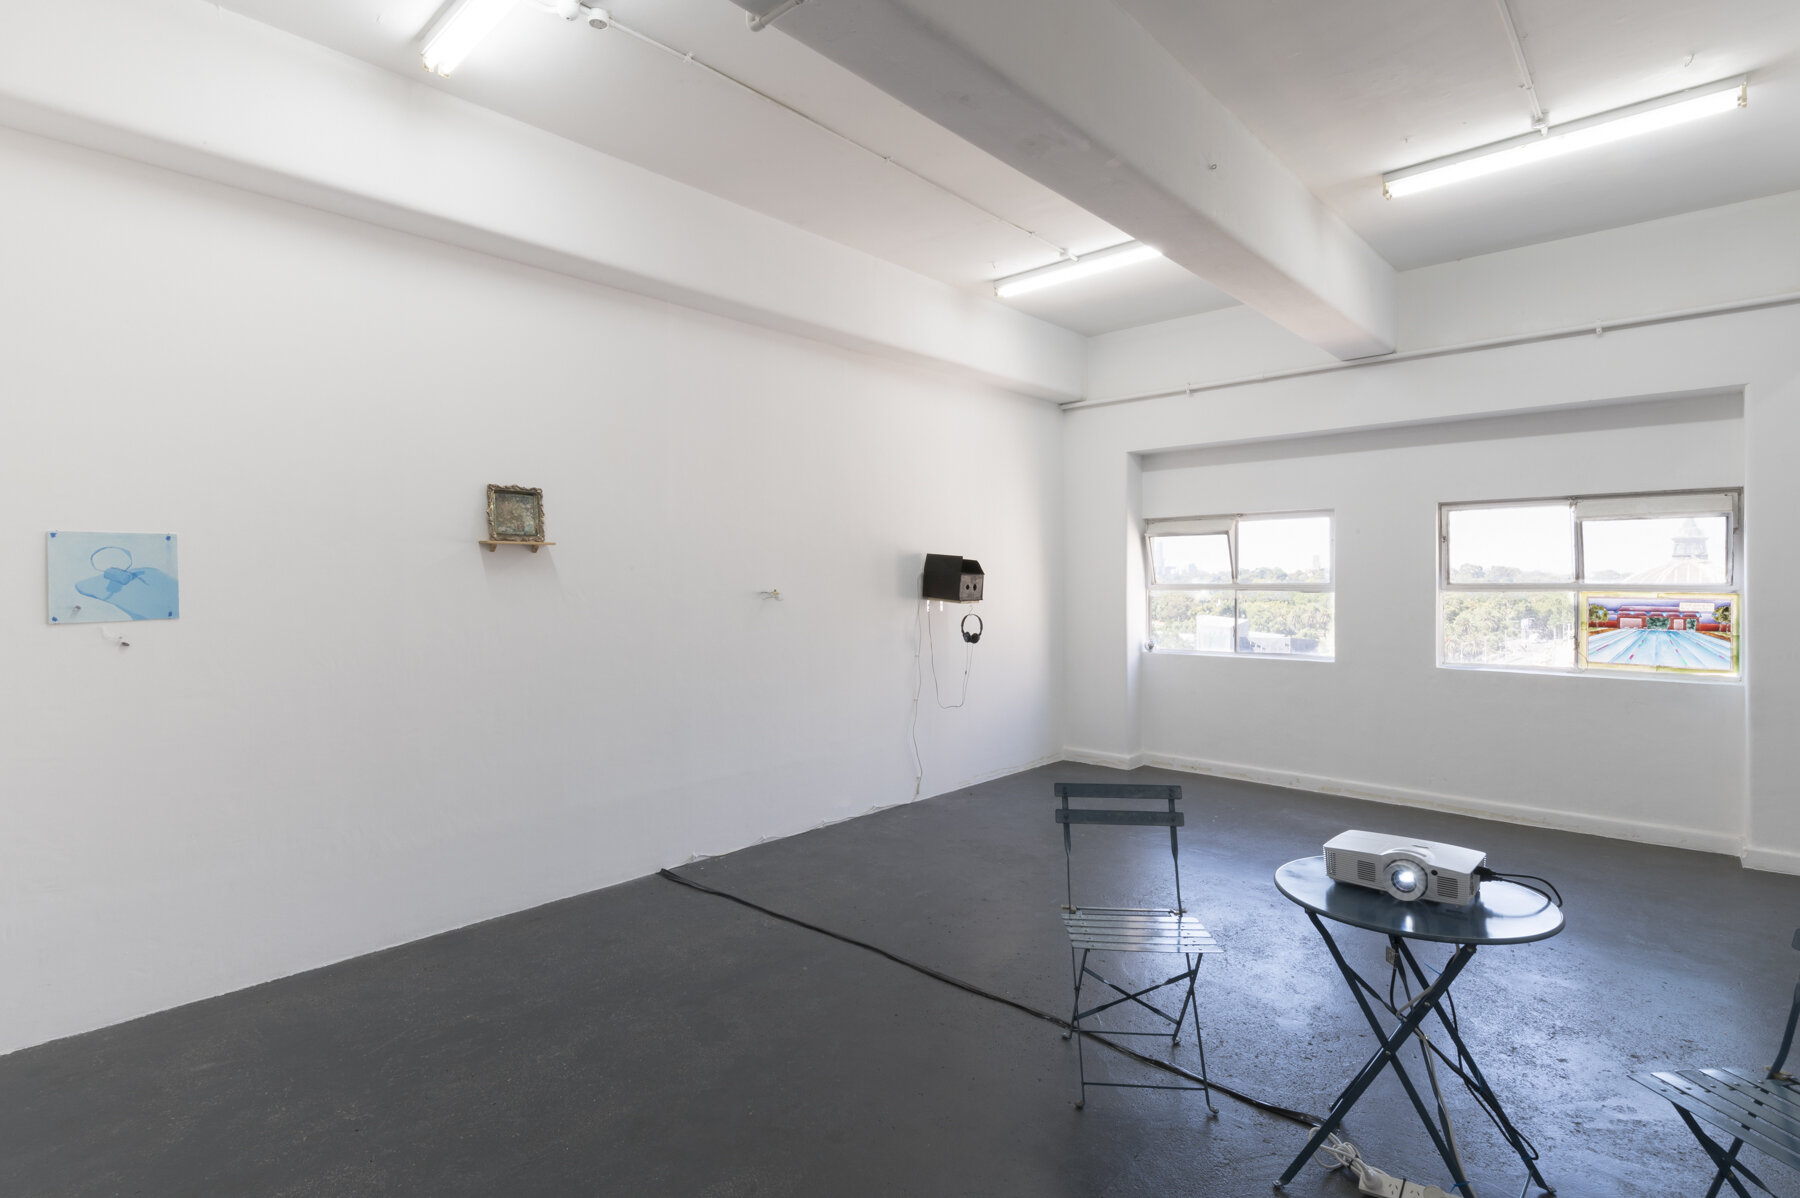   Installation view   Pictured (from left to right): Madeleine Minack, Kaijern Koo, Madeleine Minack, Rachel Button, Kaijern Koo, Veronica Charmont (foreground).   Image courtesy of Aaron Christopher Rees. 